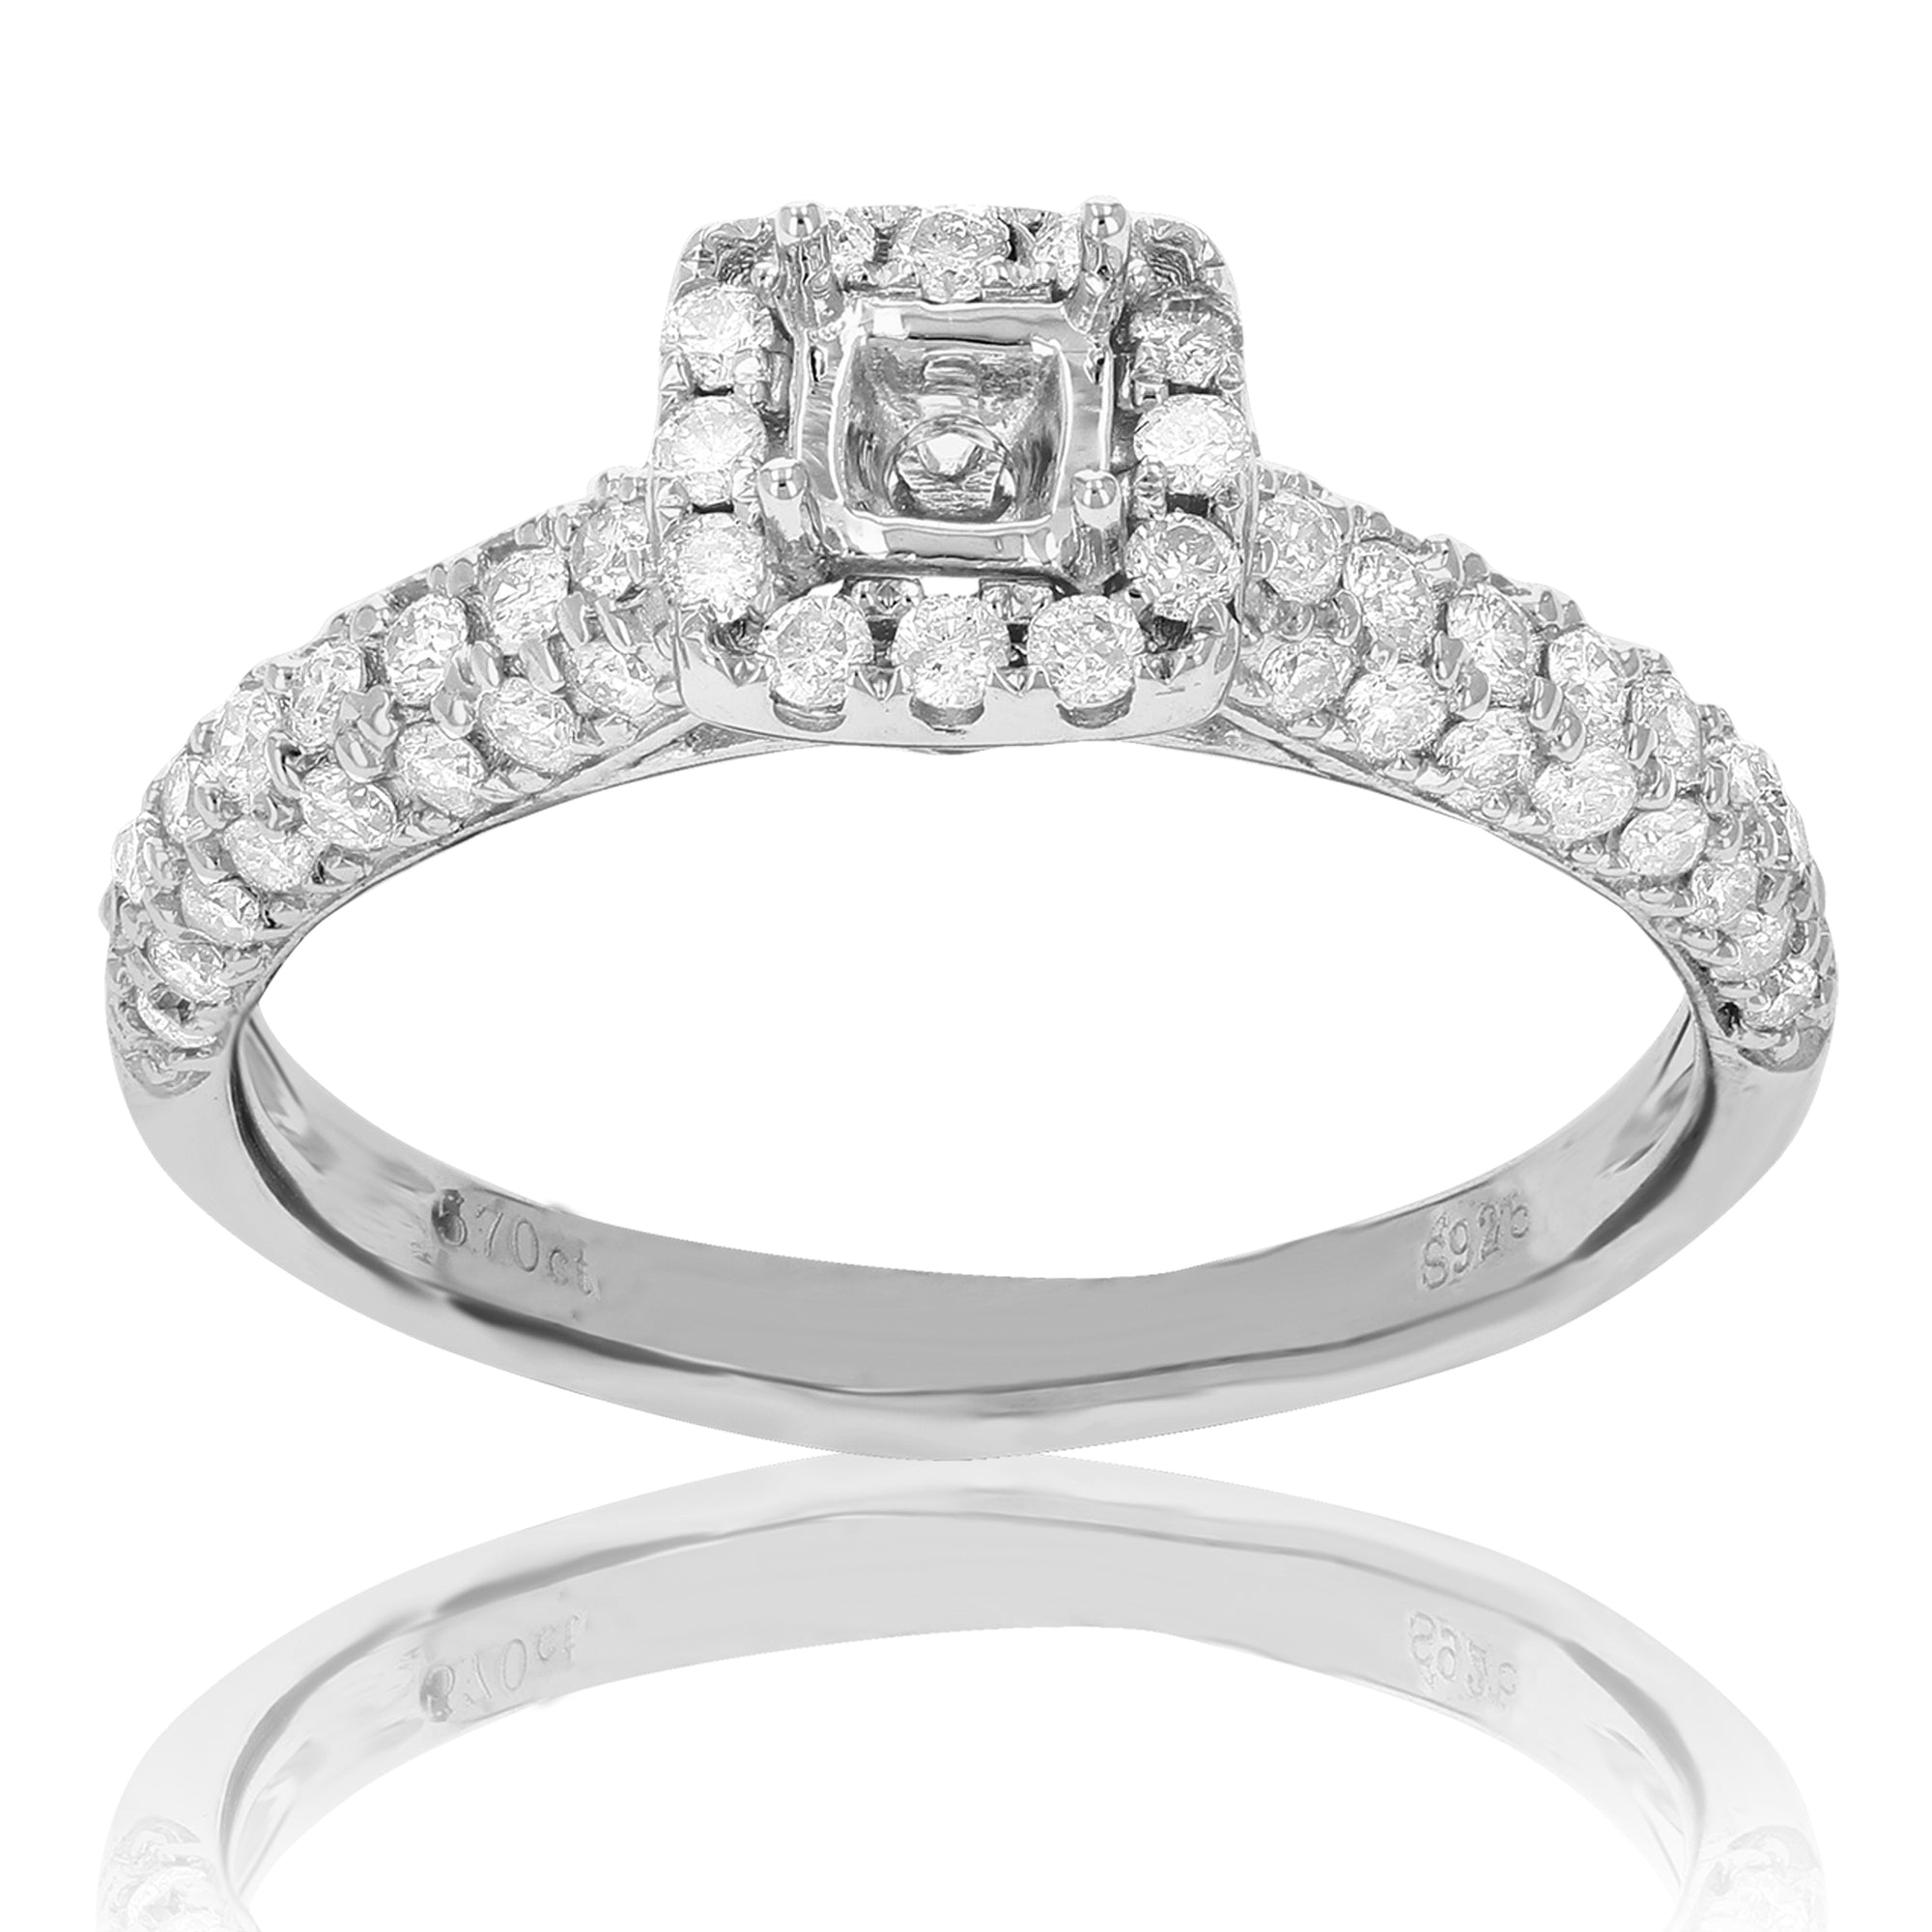 0.60 cttw Diamond Semi Mount Engagement Ring .925 Sterling Silver Size 7